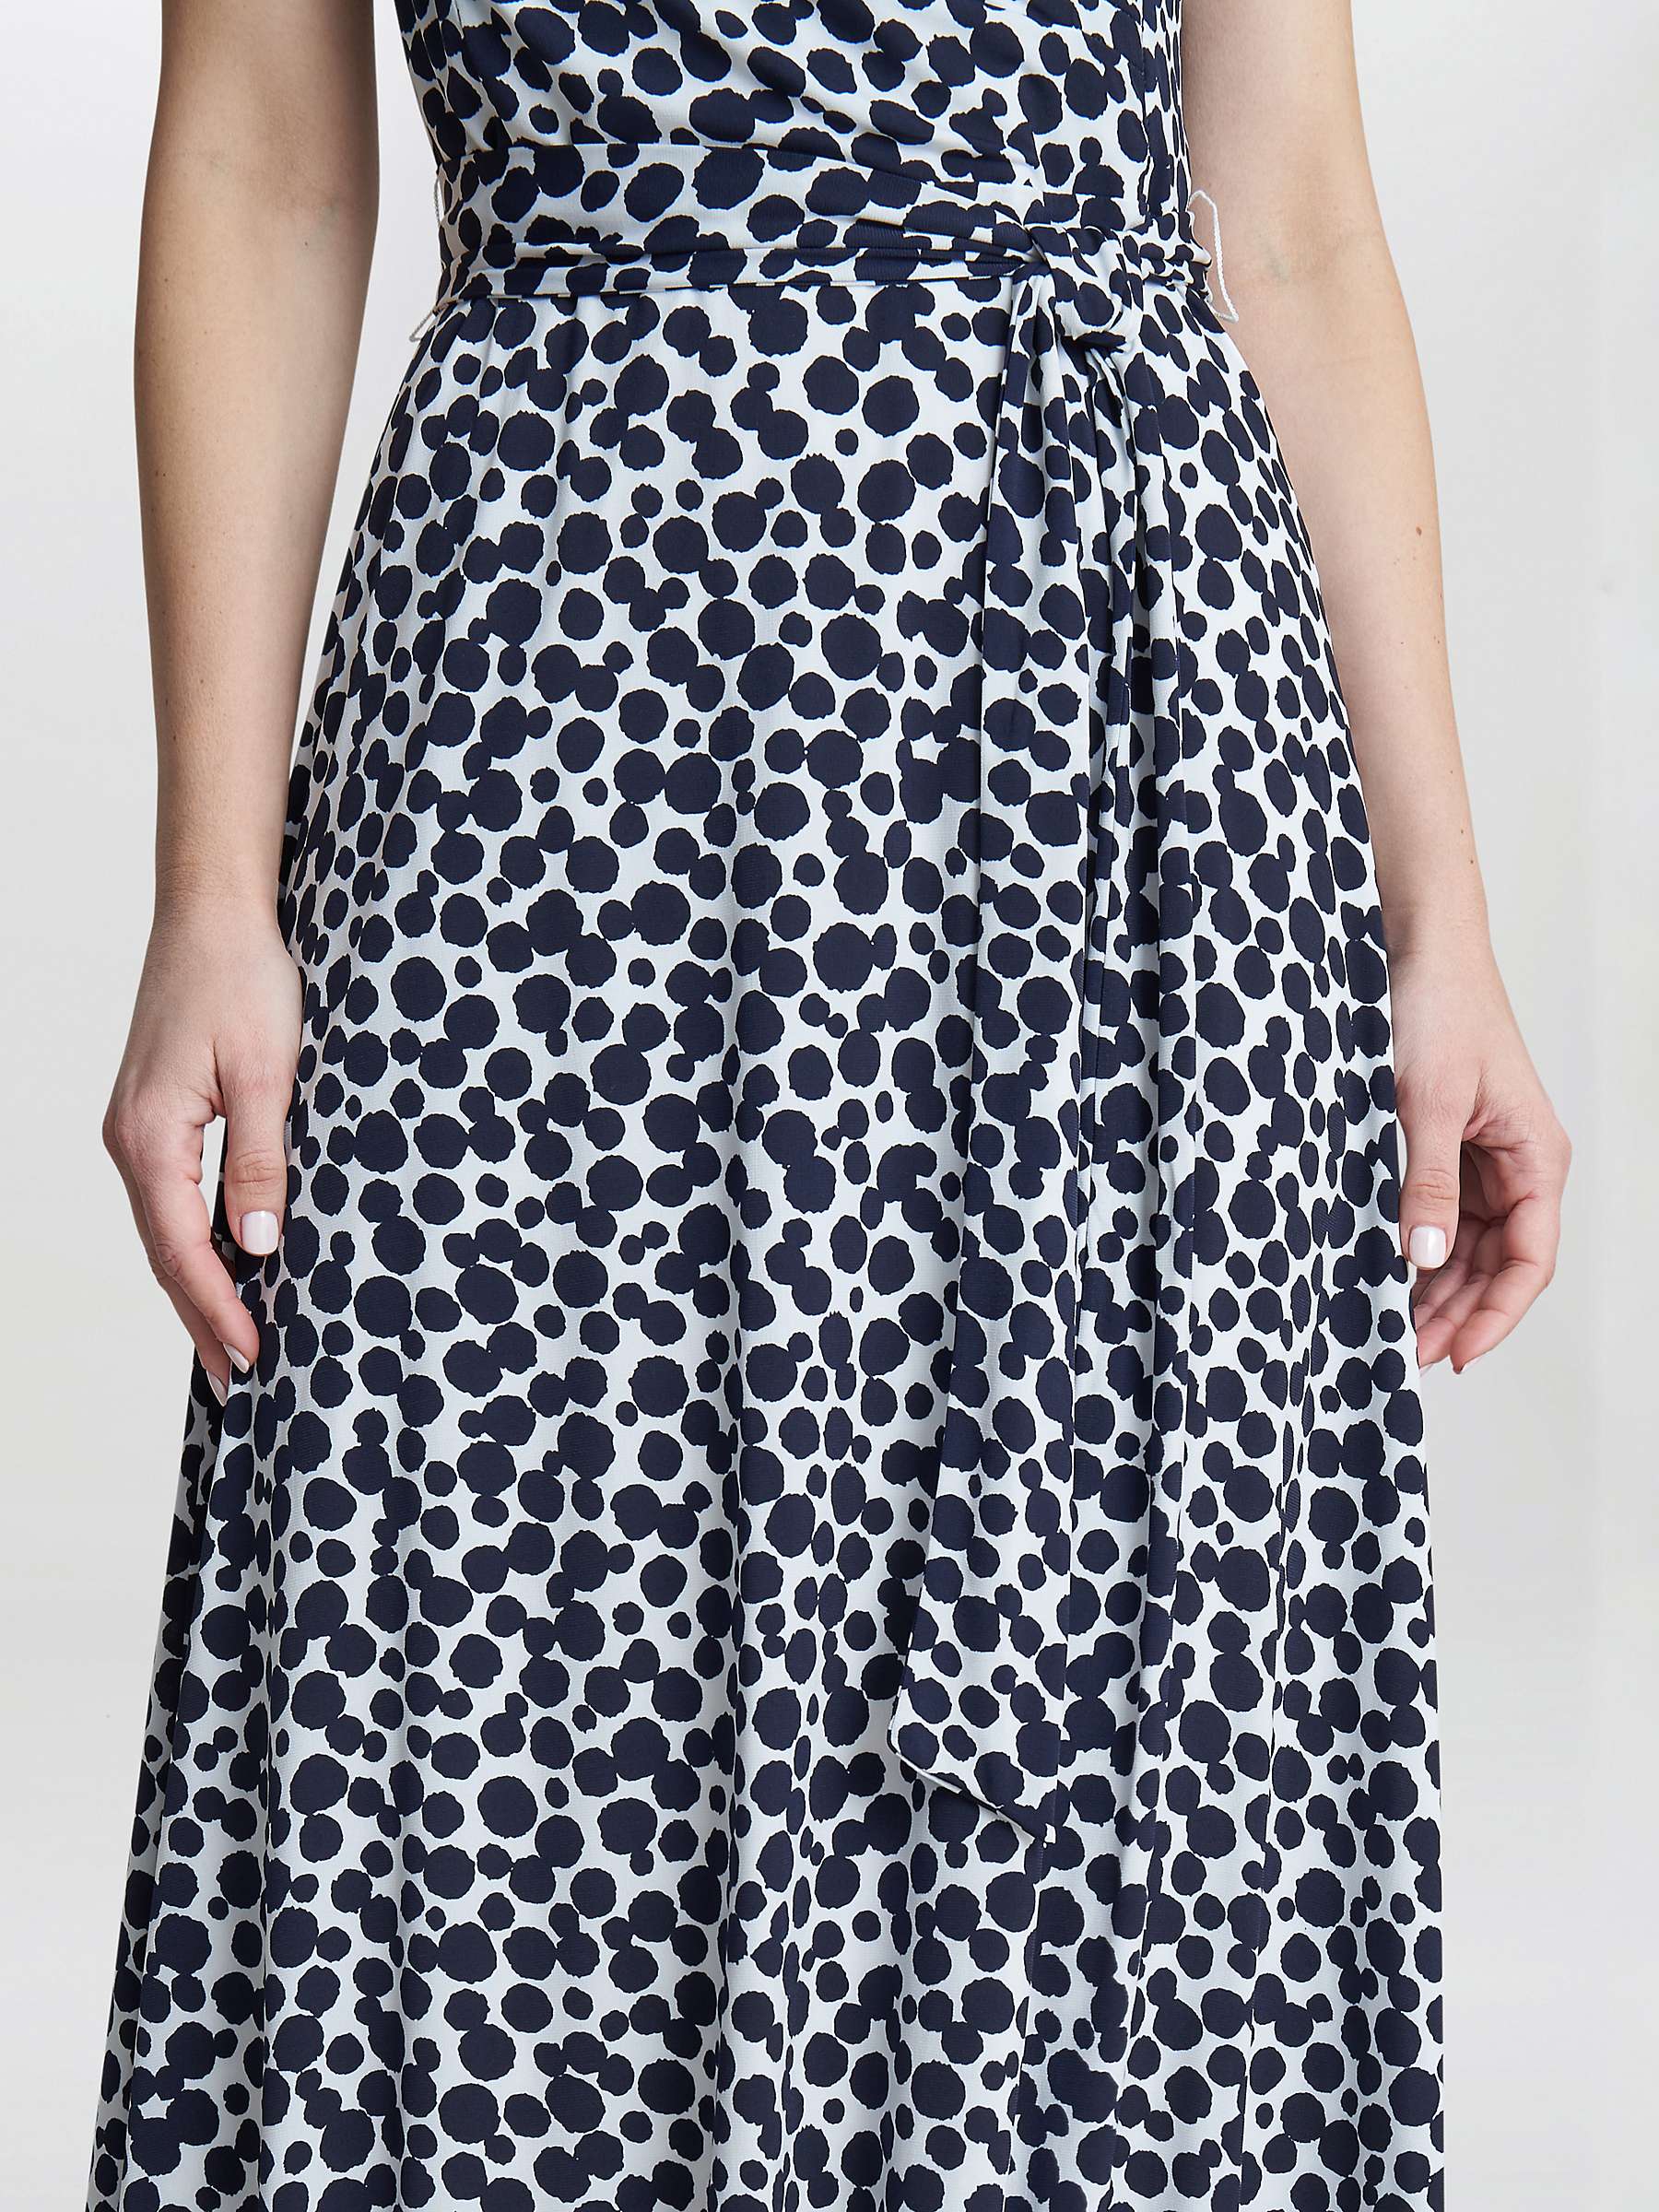 Buy Gina Bacconi Dolly Fit And Flare Jersey Dress, Navy/White Online at johnlewis.com